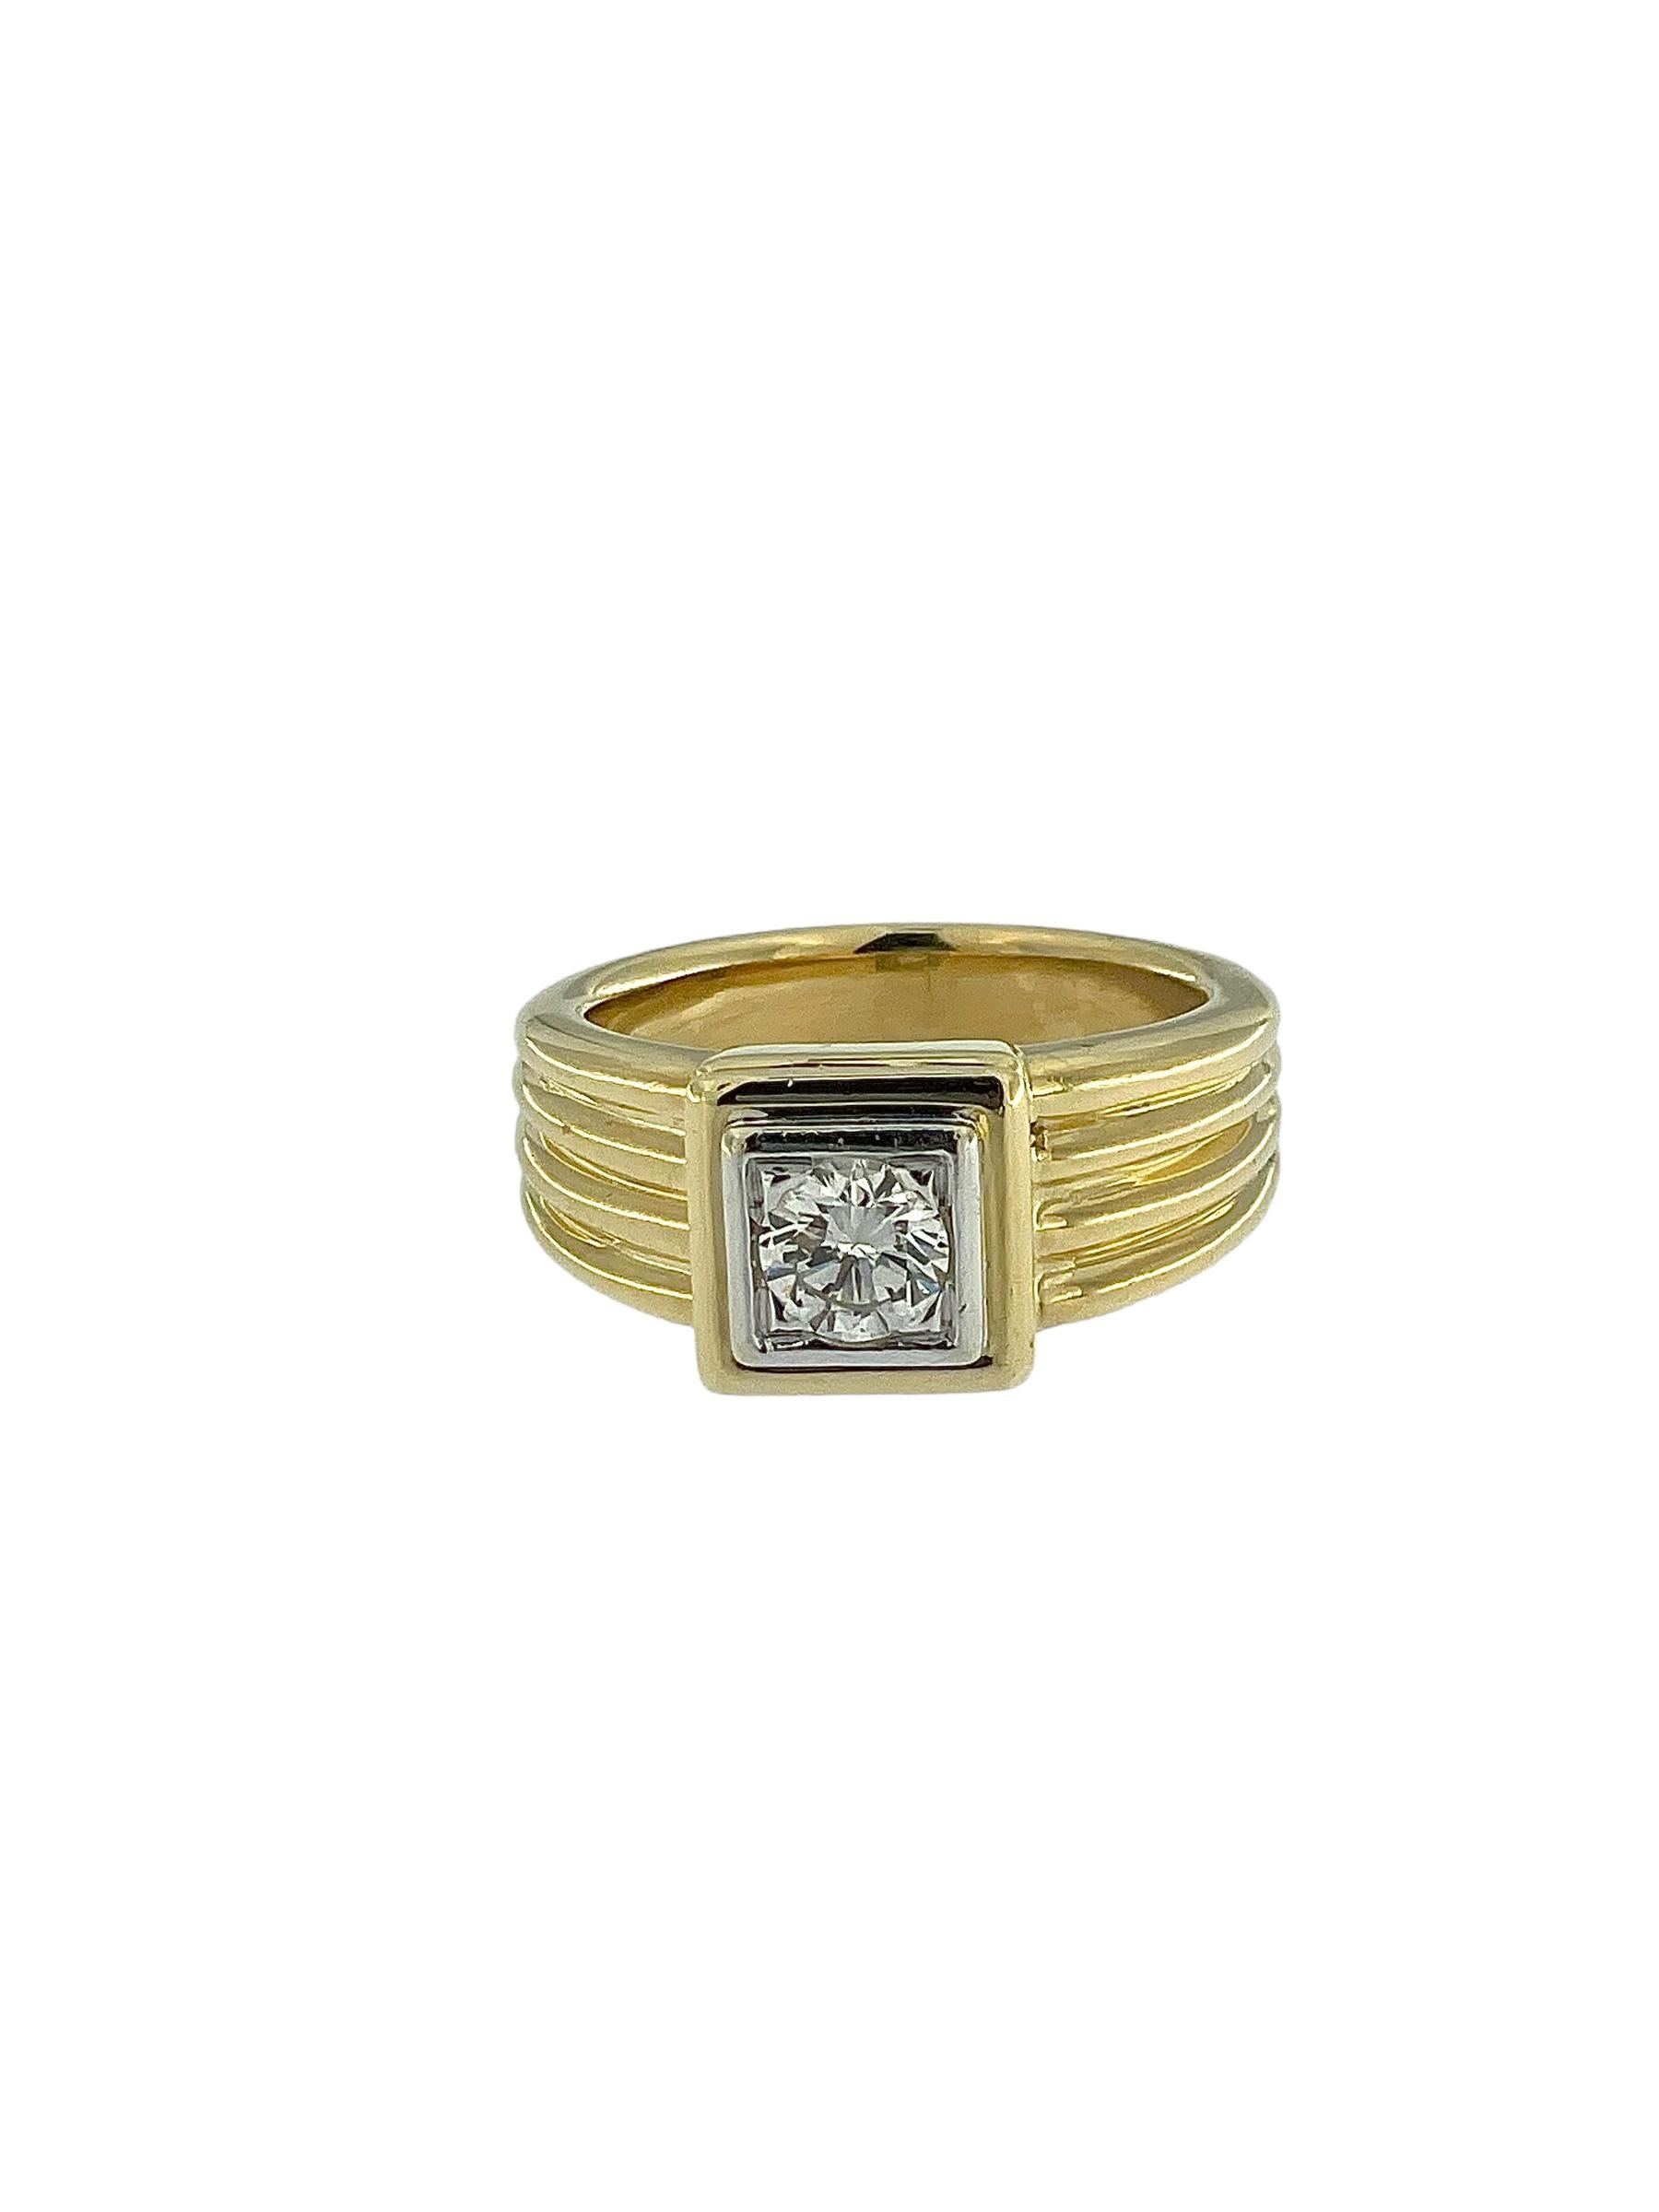 Women's or Men's HRD Certified Signet Diamond Ring Yellow and White Gold For Sale